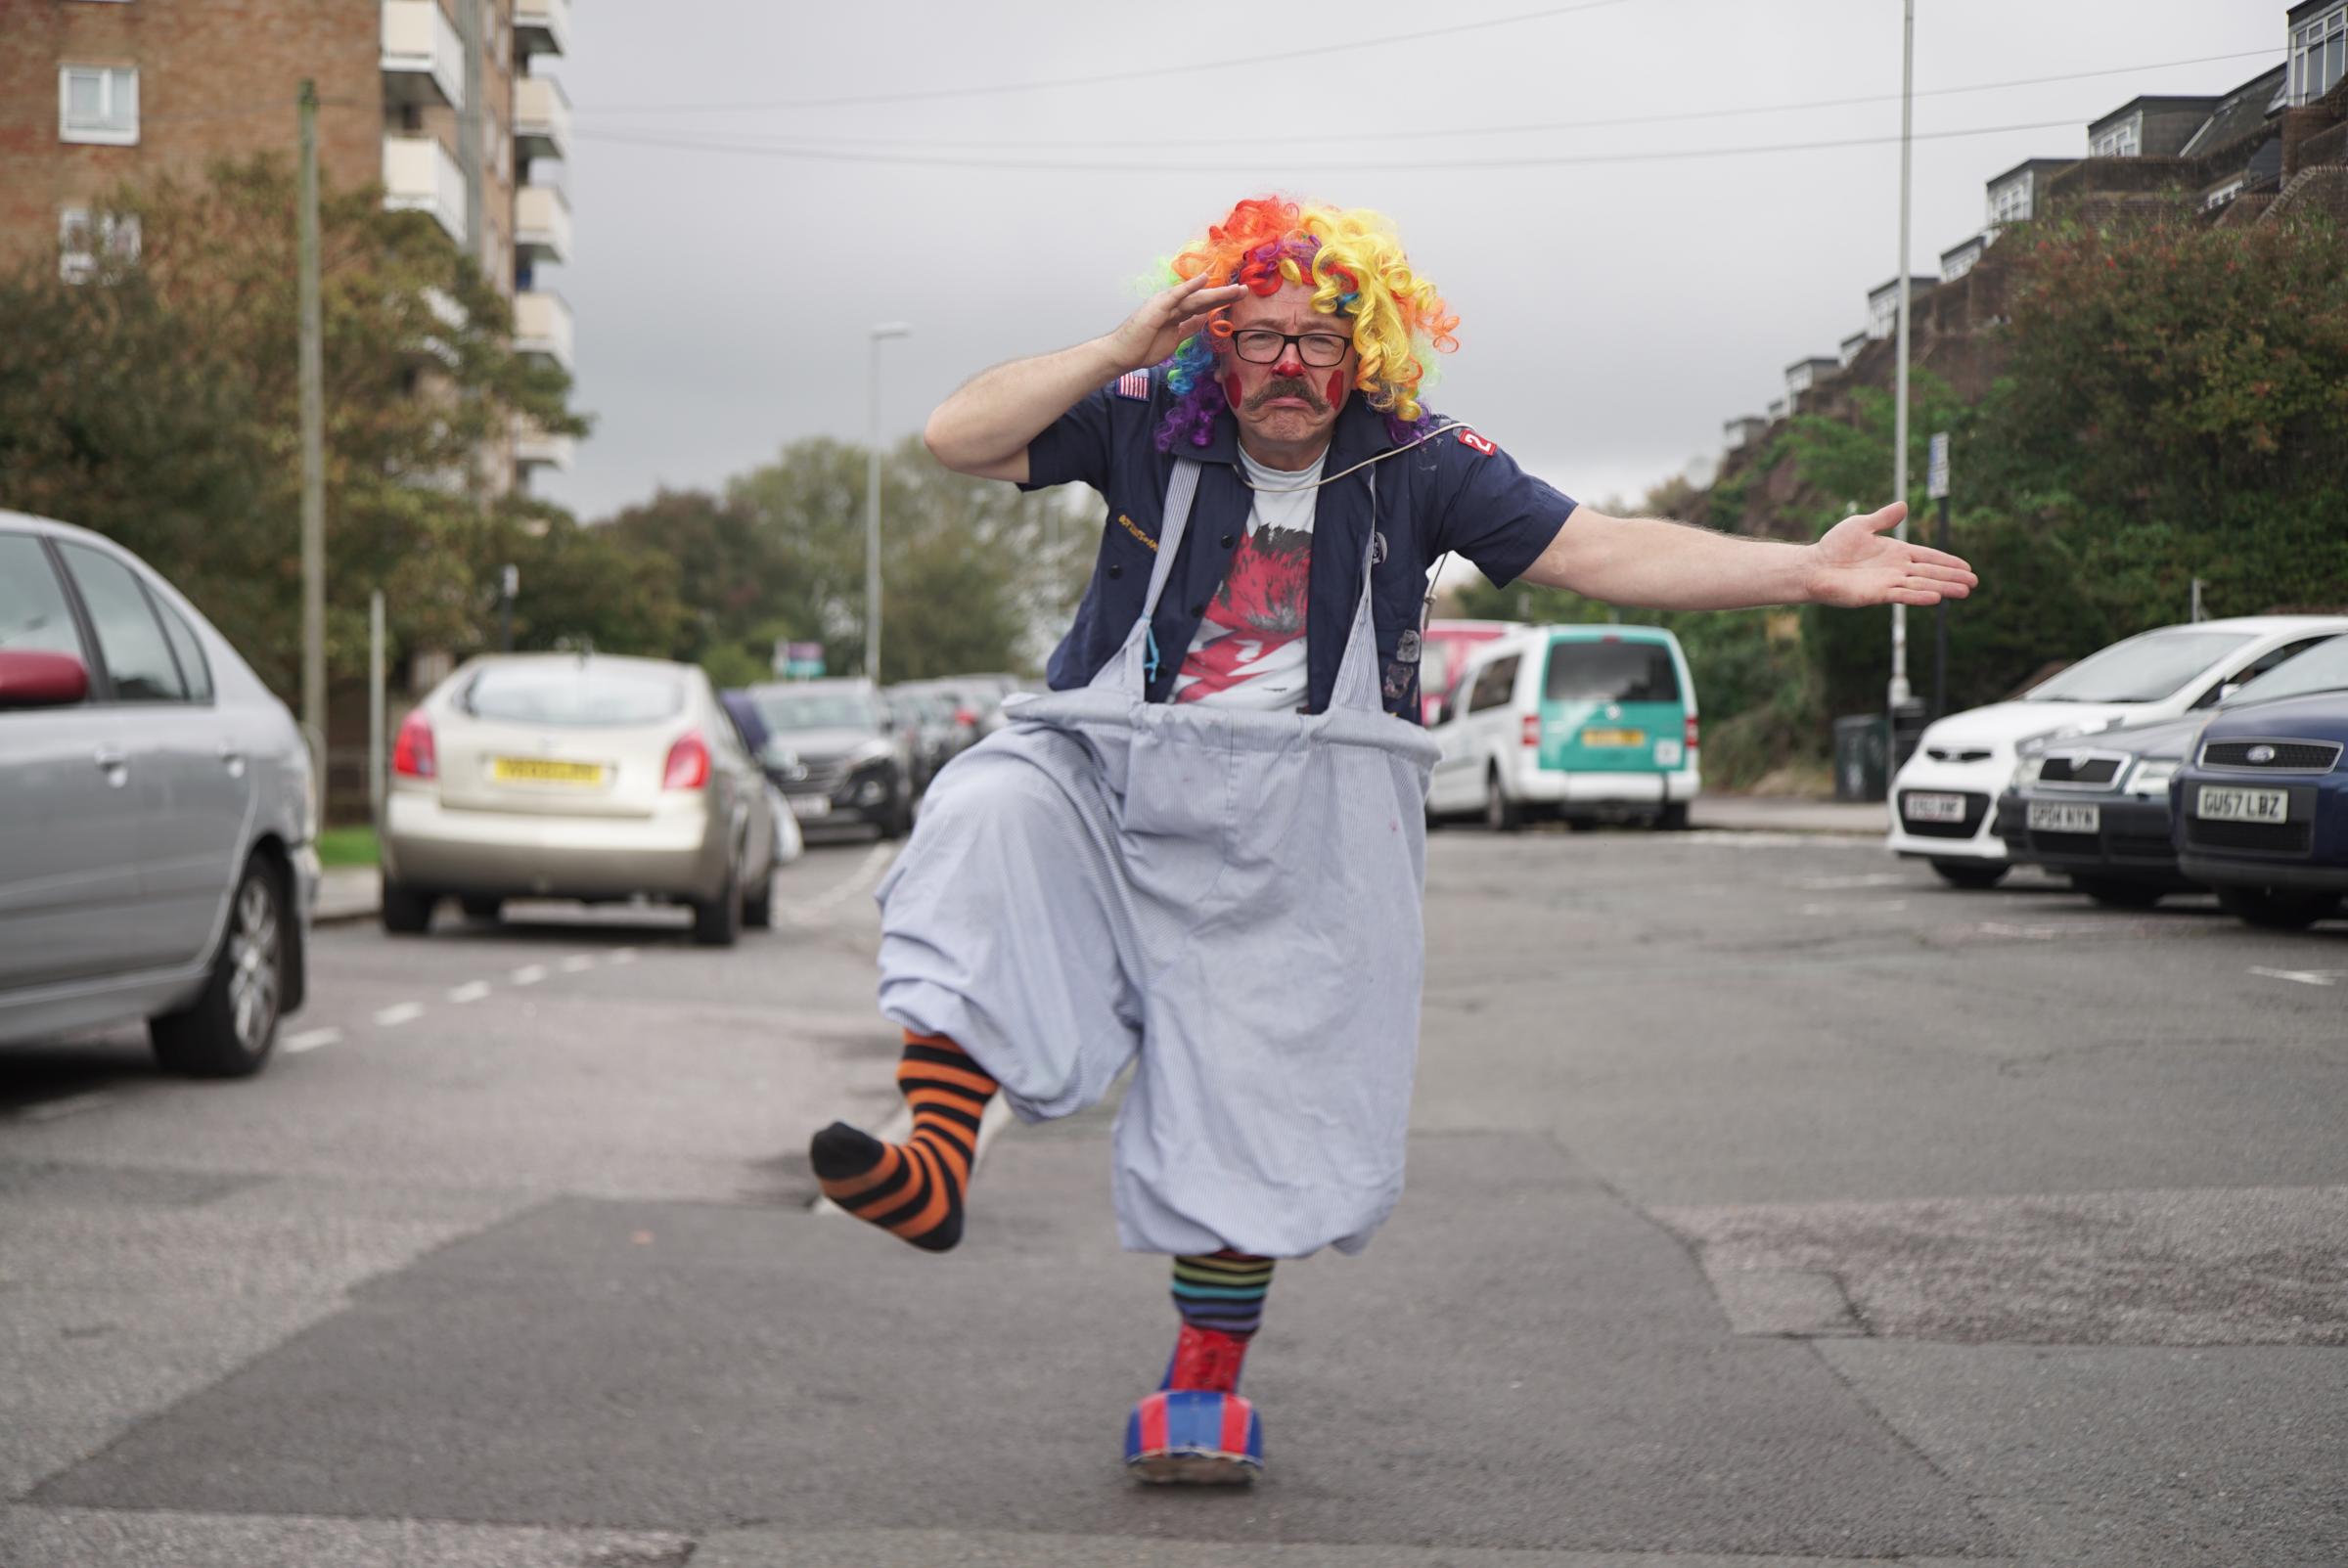 MISSING: Clown loses size 15 comedy shoe during bike ride